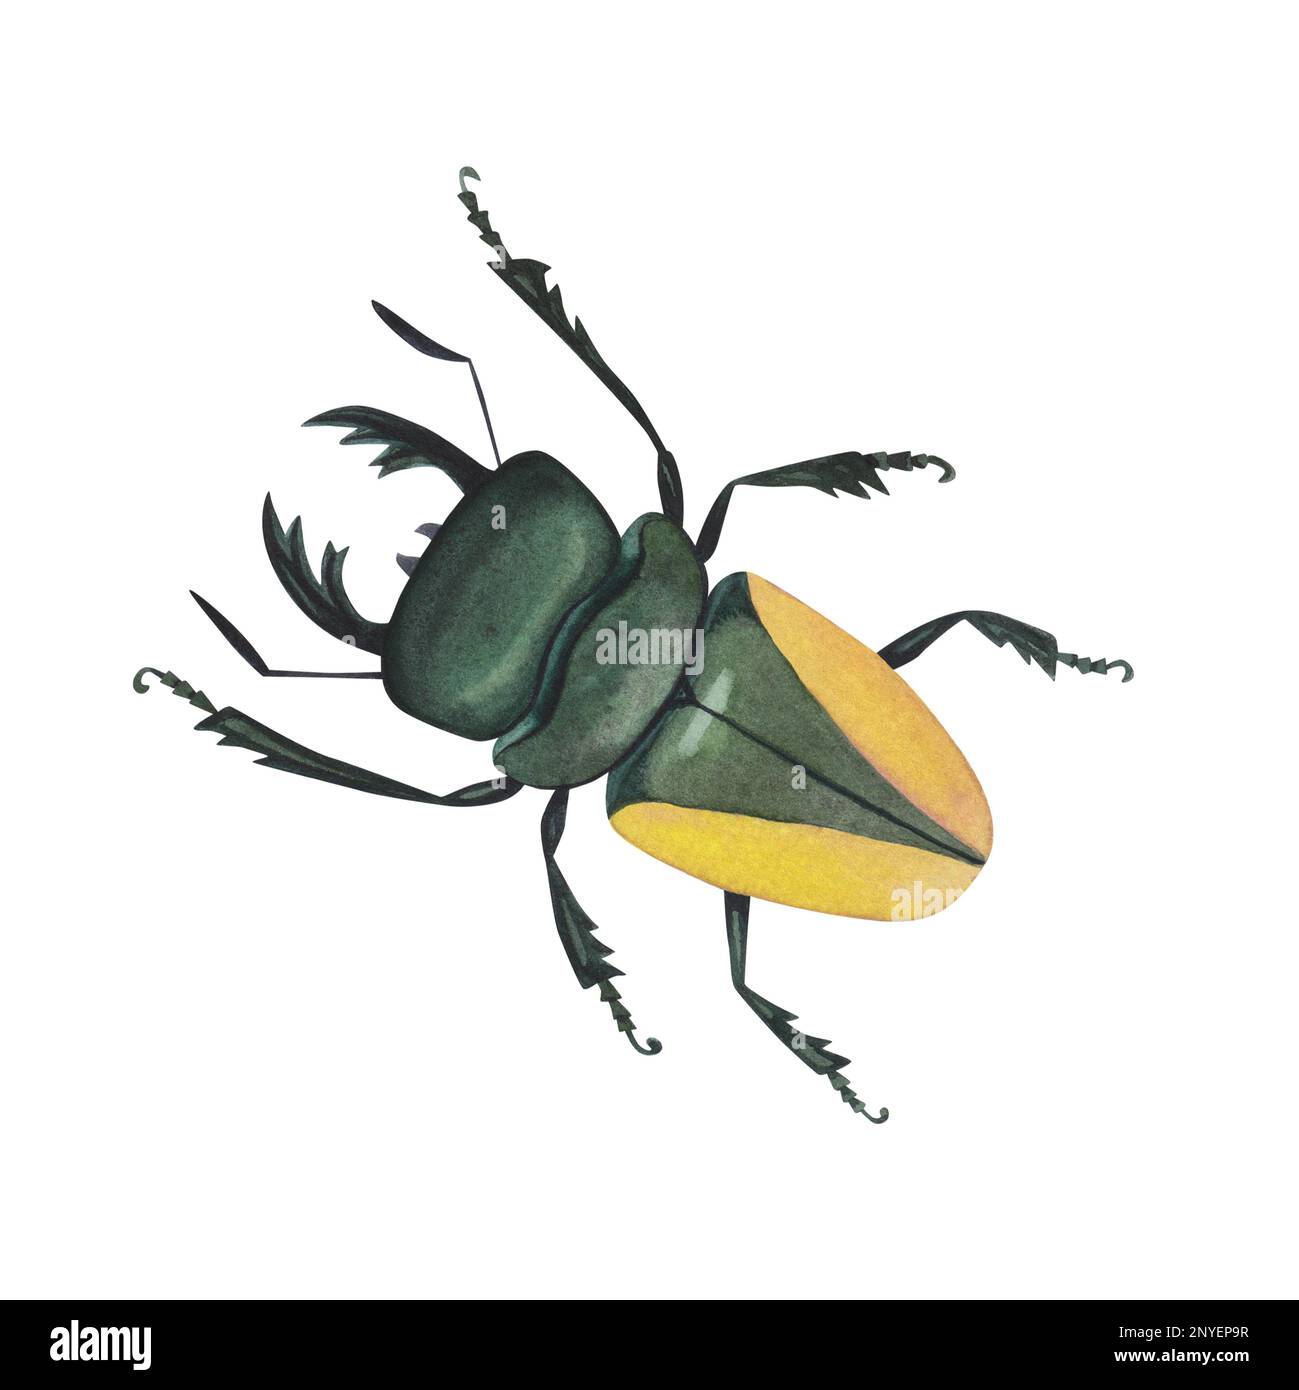 Realistic beetles insect isolated on white background. Watercolor hand drawn stag beetle coleoptera llustration for design banner, poster. Stock Photo